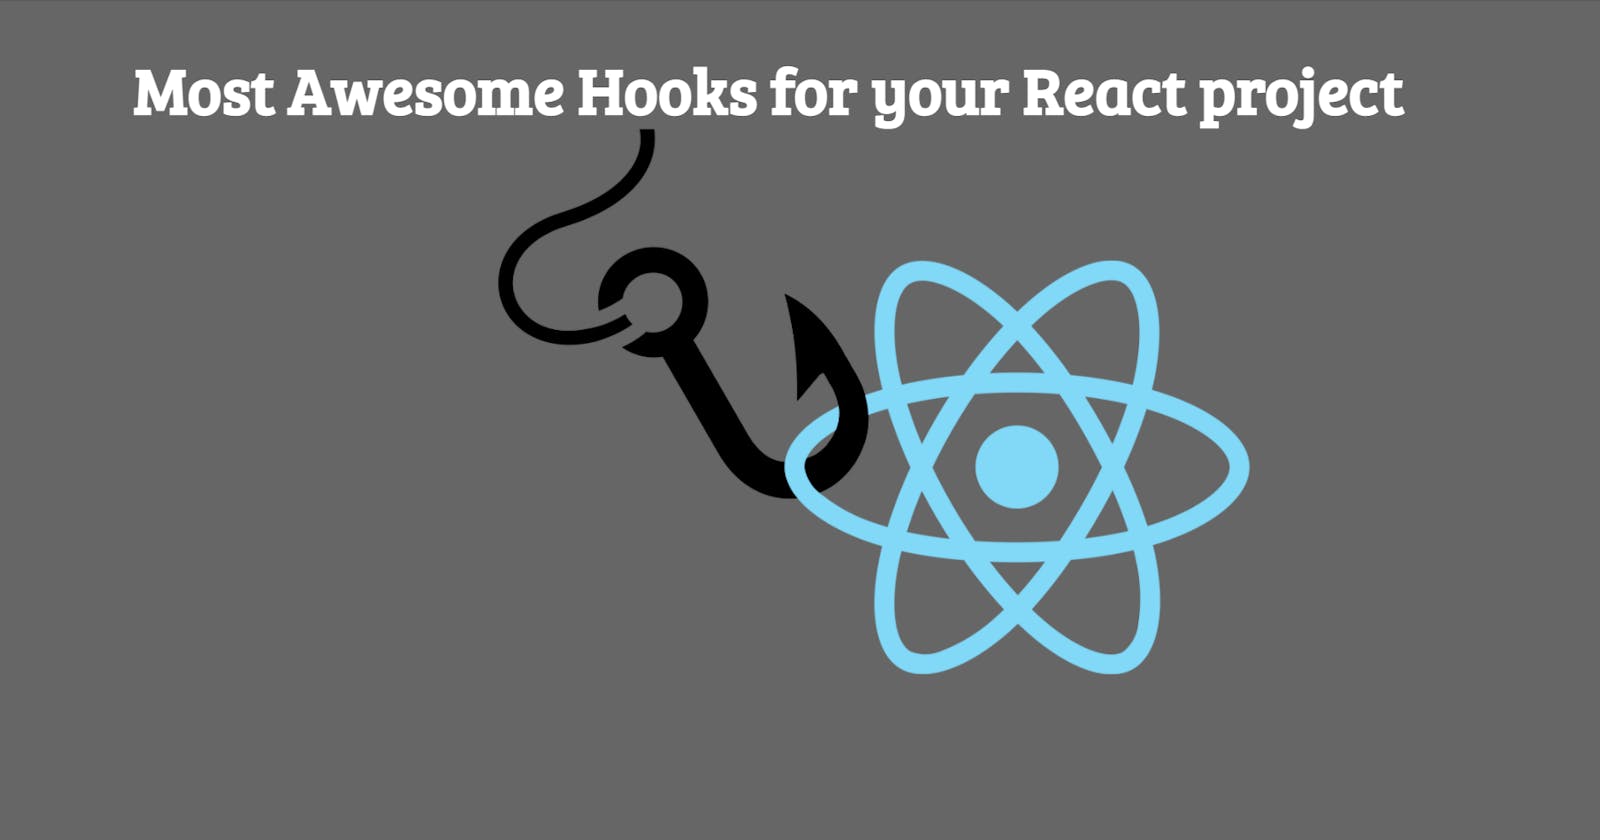 Most Awesome Hooks for your React project